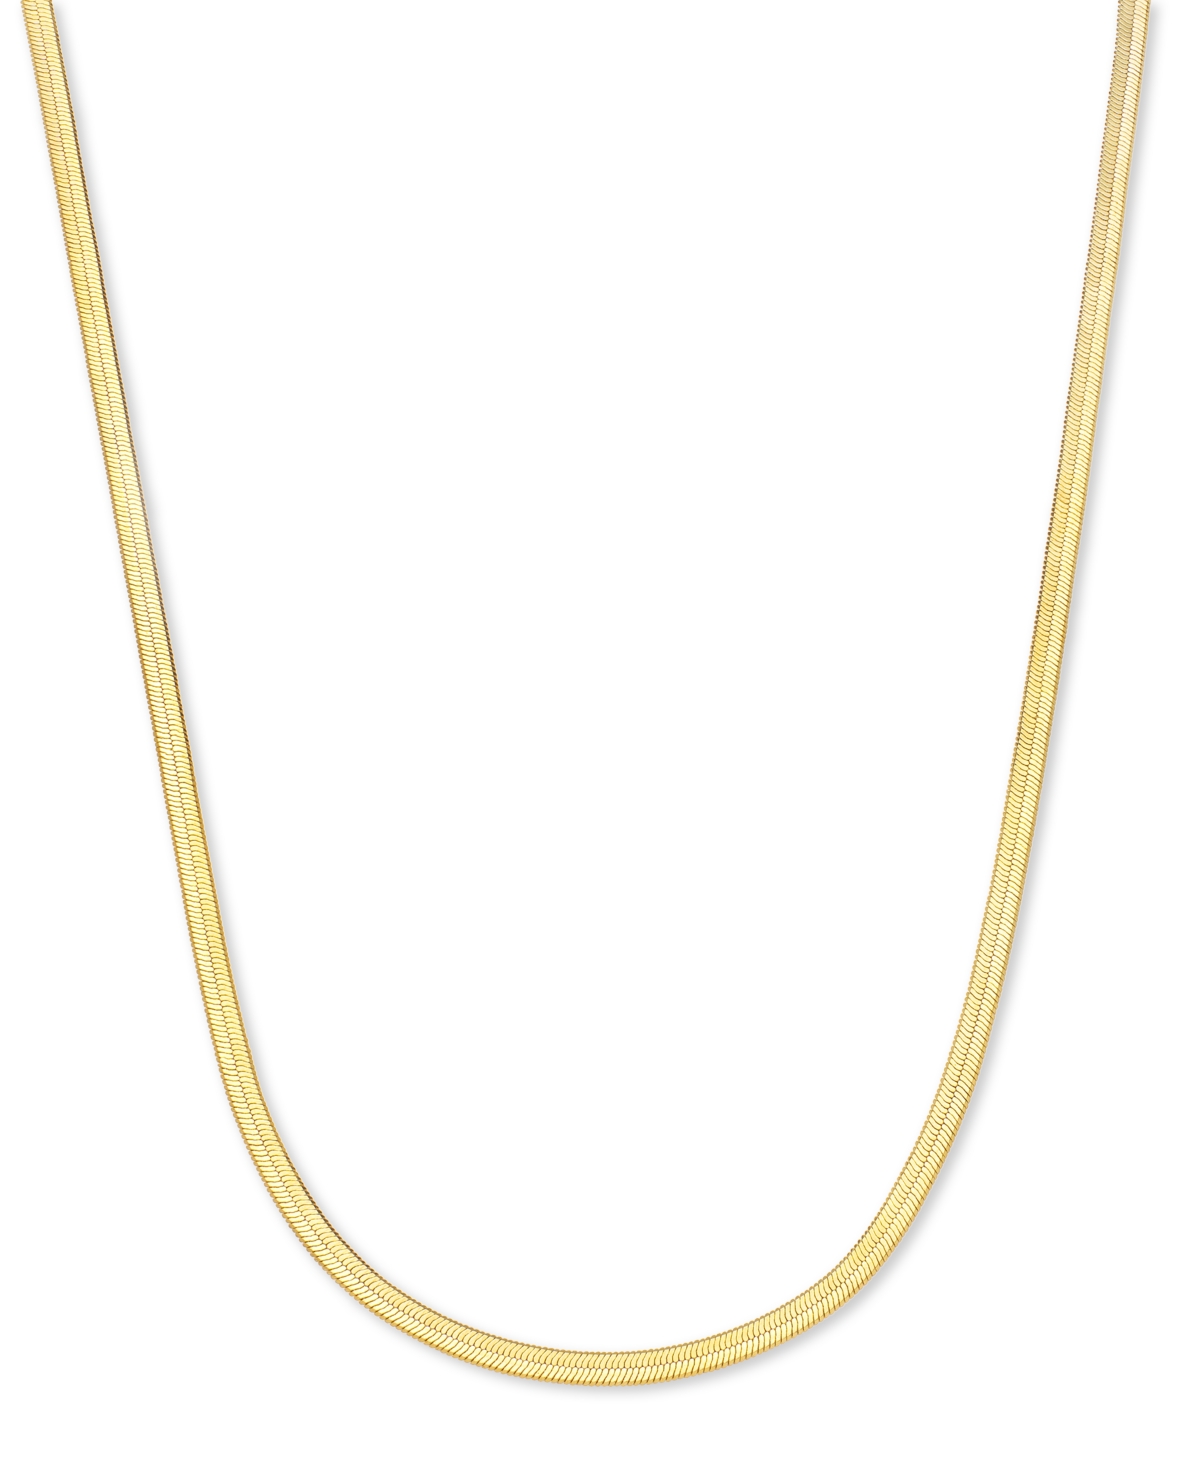 18k Gold-Plated Stainless Steel Herringbone Chain 17-3/4" Collar Necklace - Gold